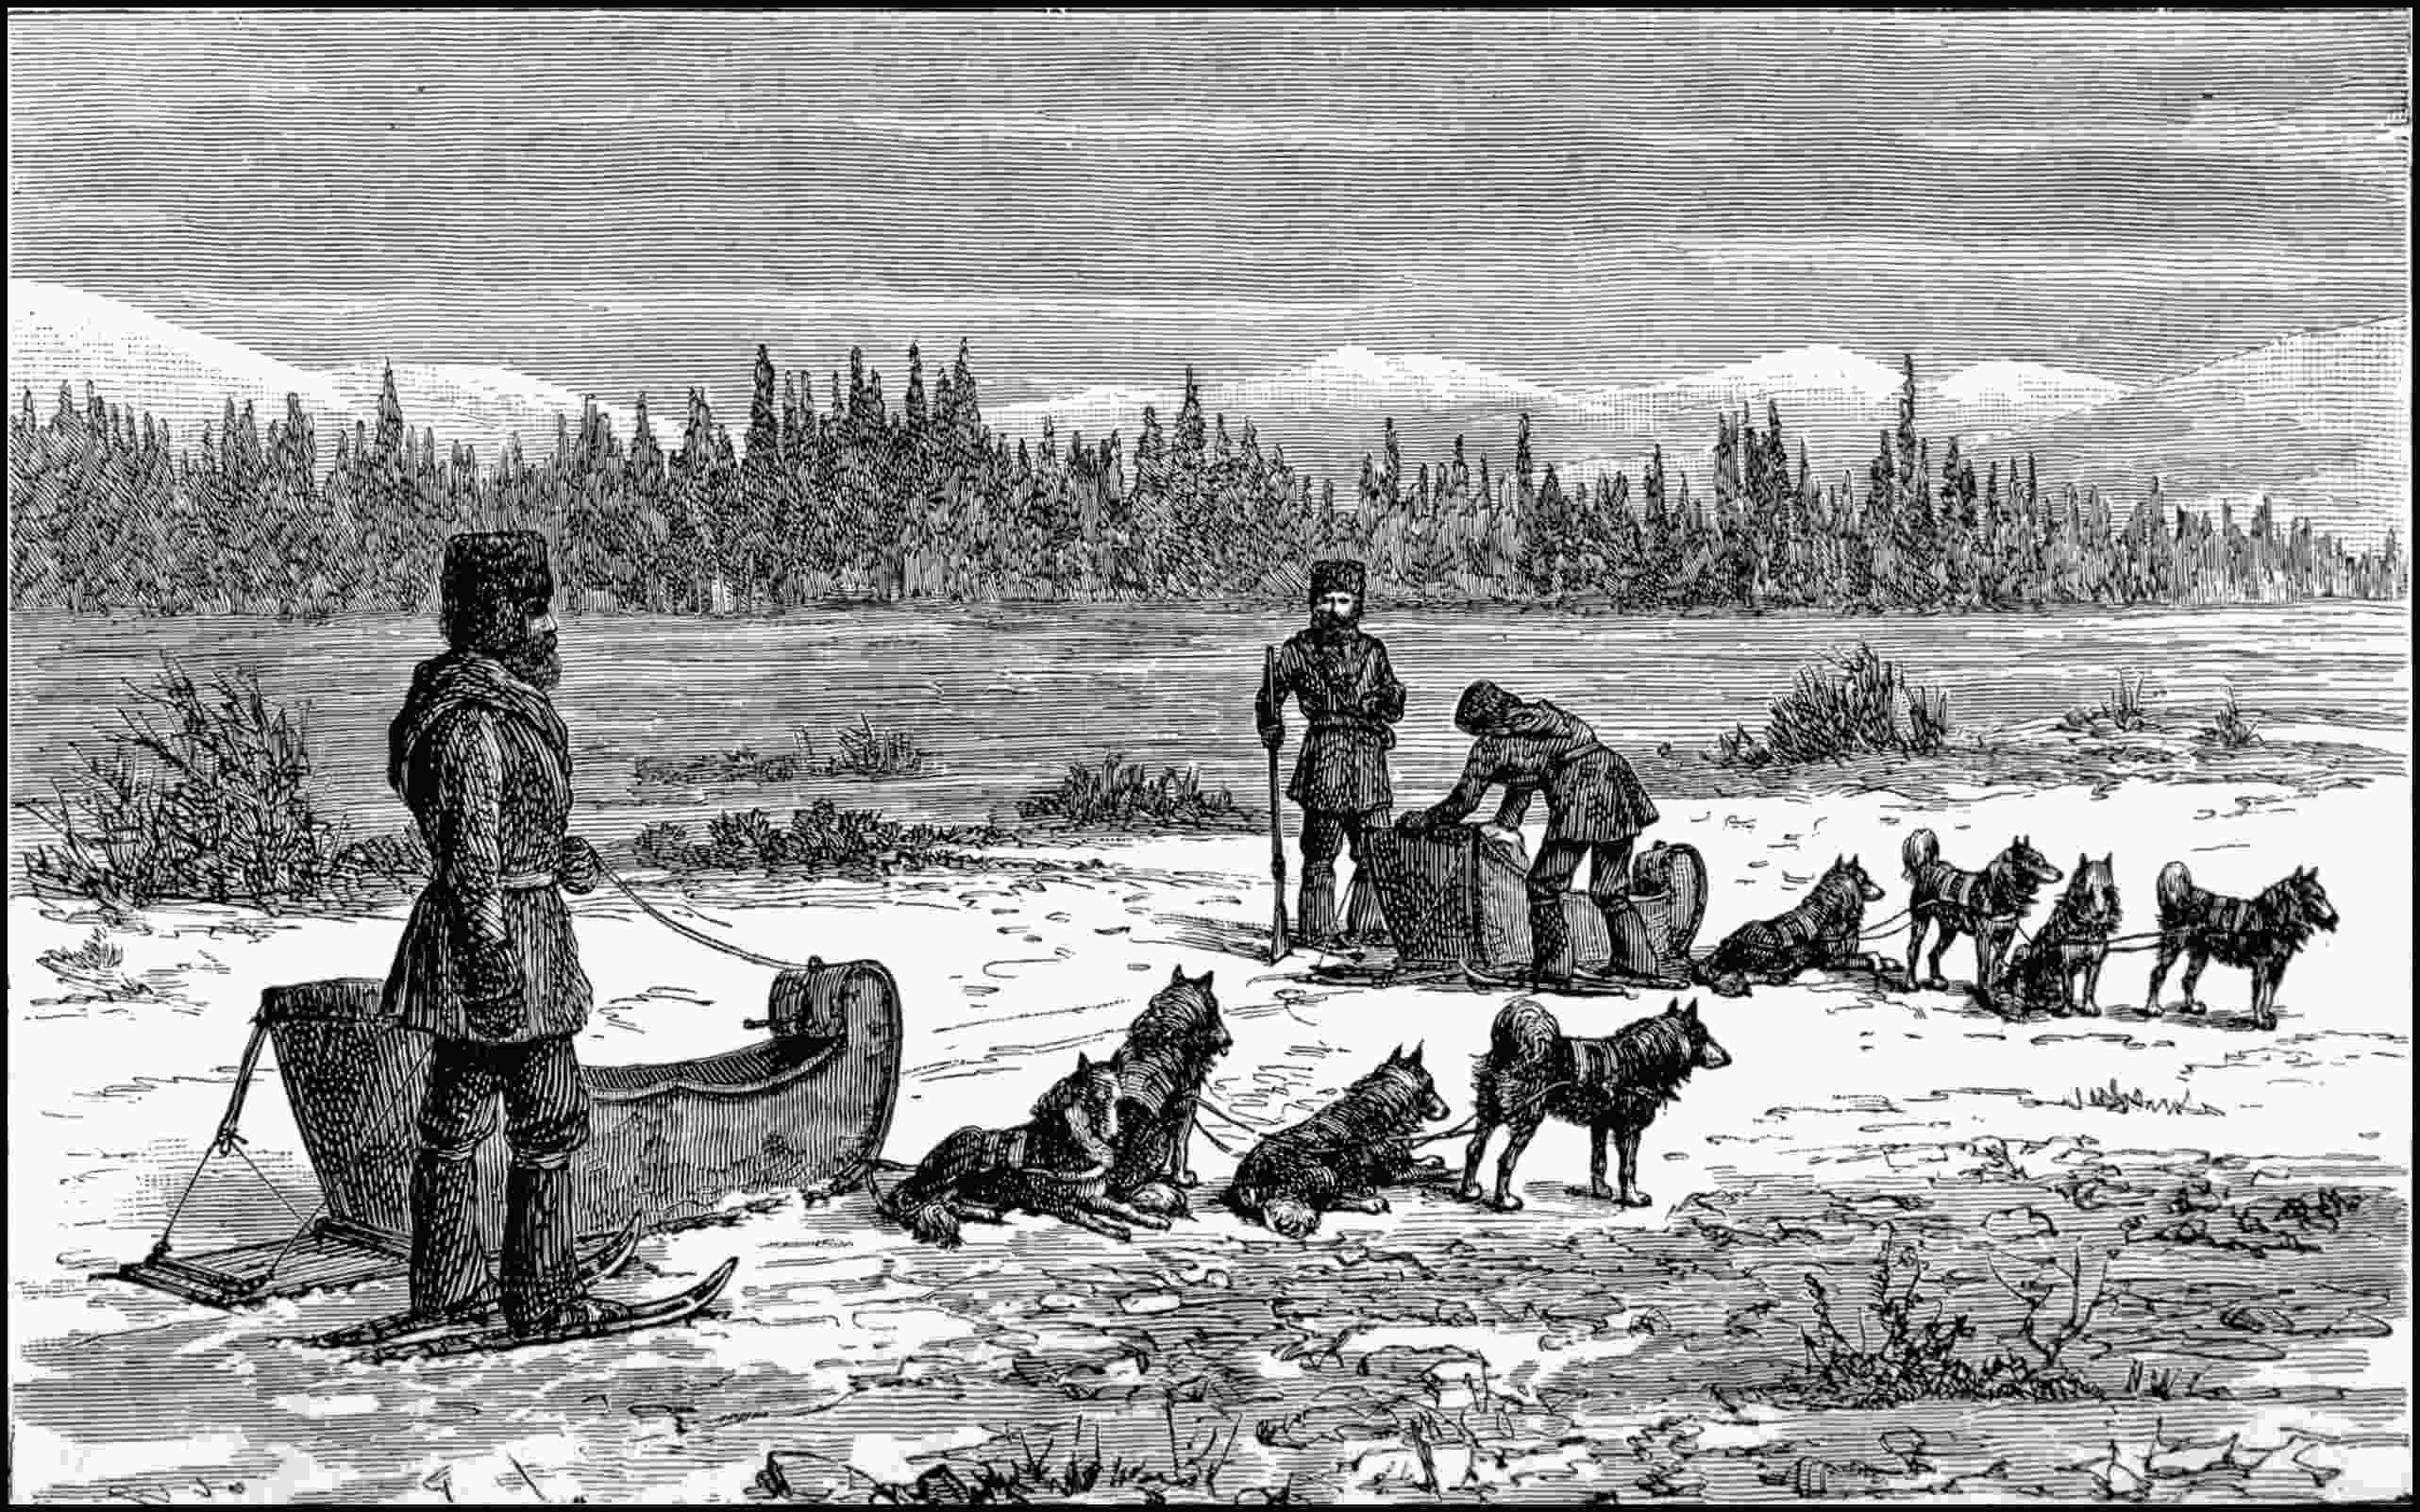 The Wild North Land, by William Francis Butler—A Project Gutenberg eBook